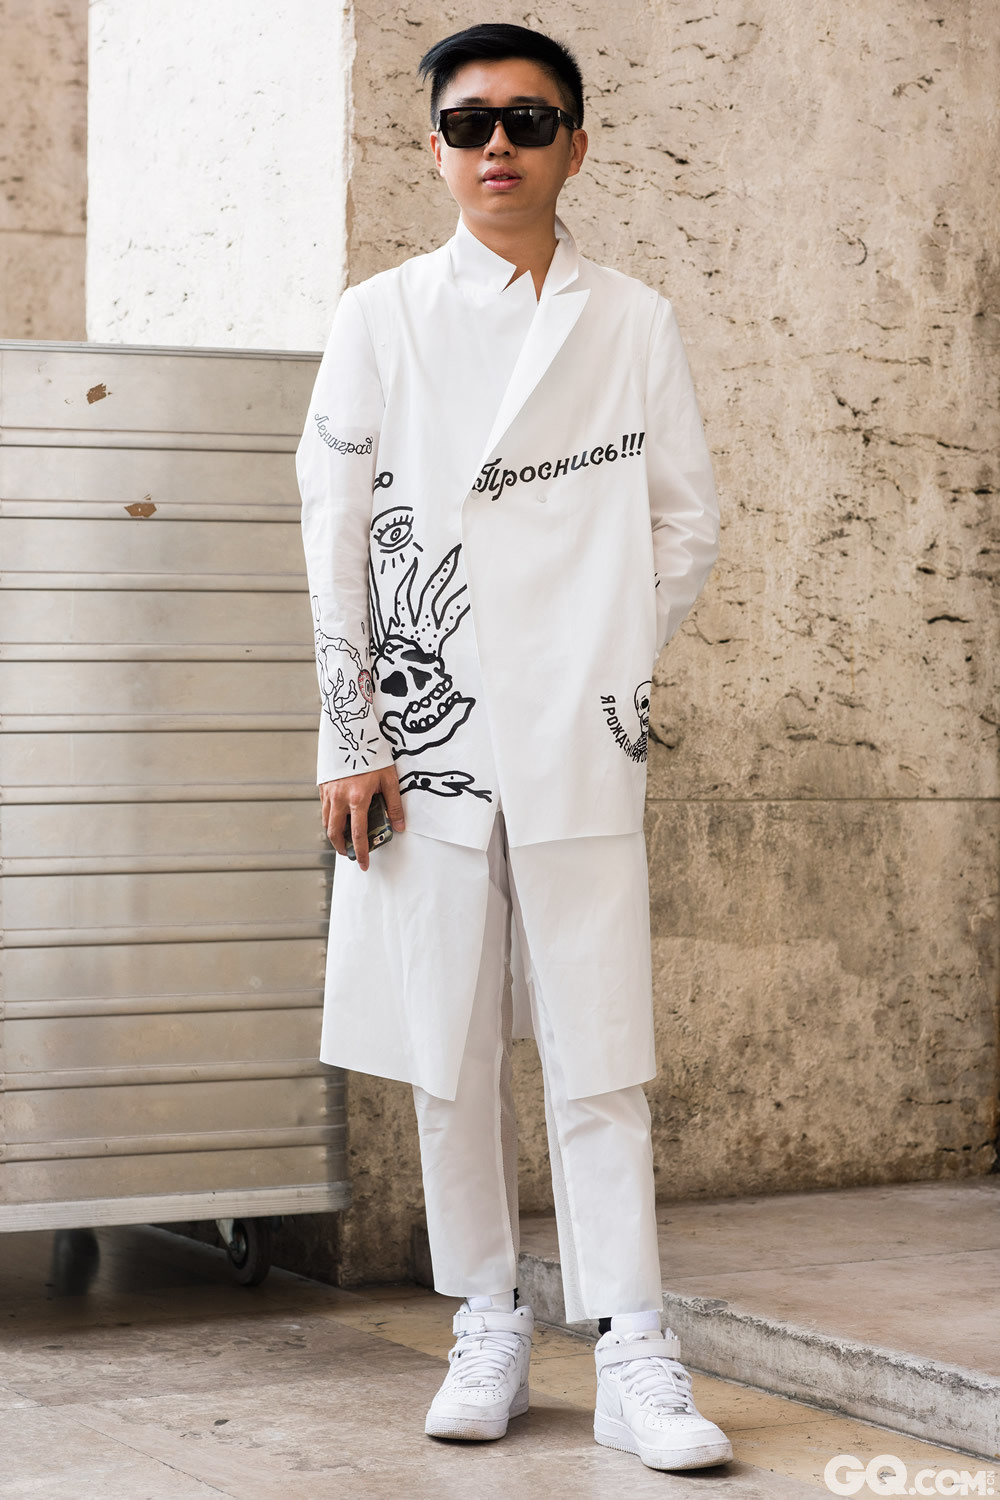 Declan
Glasses: Saint Laurent 
Suit: San kuanz
Shoes: Nike
	
Inspiration: All white, something really fresh for a hot day
（全白色才是对于夏天来说真正新鲜的）